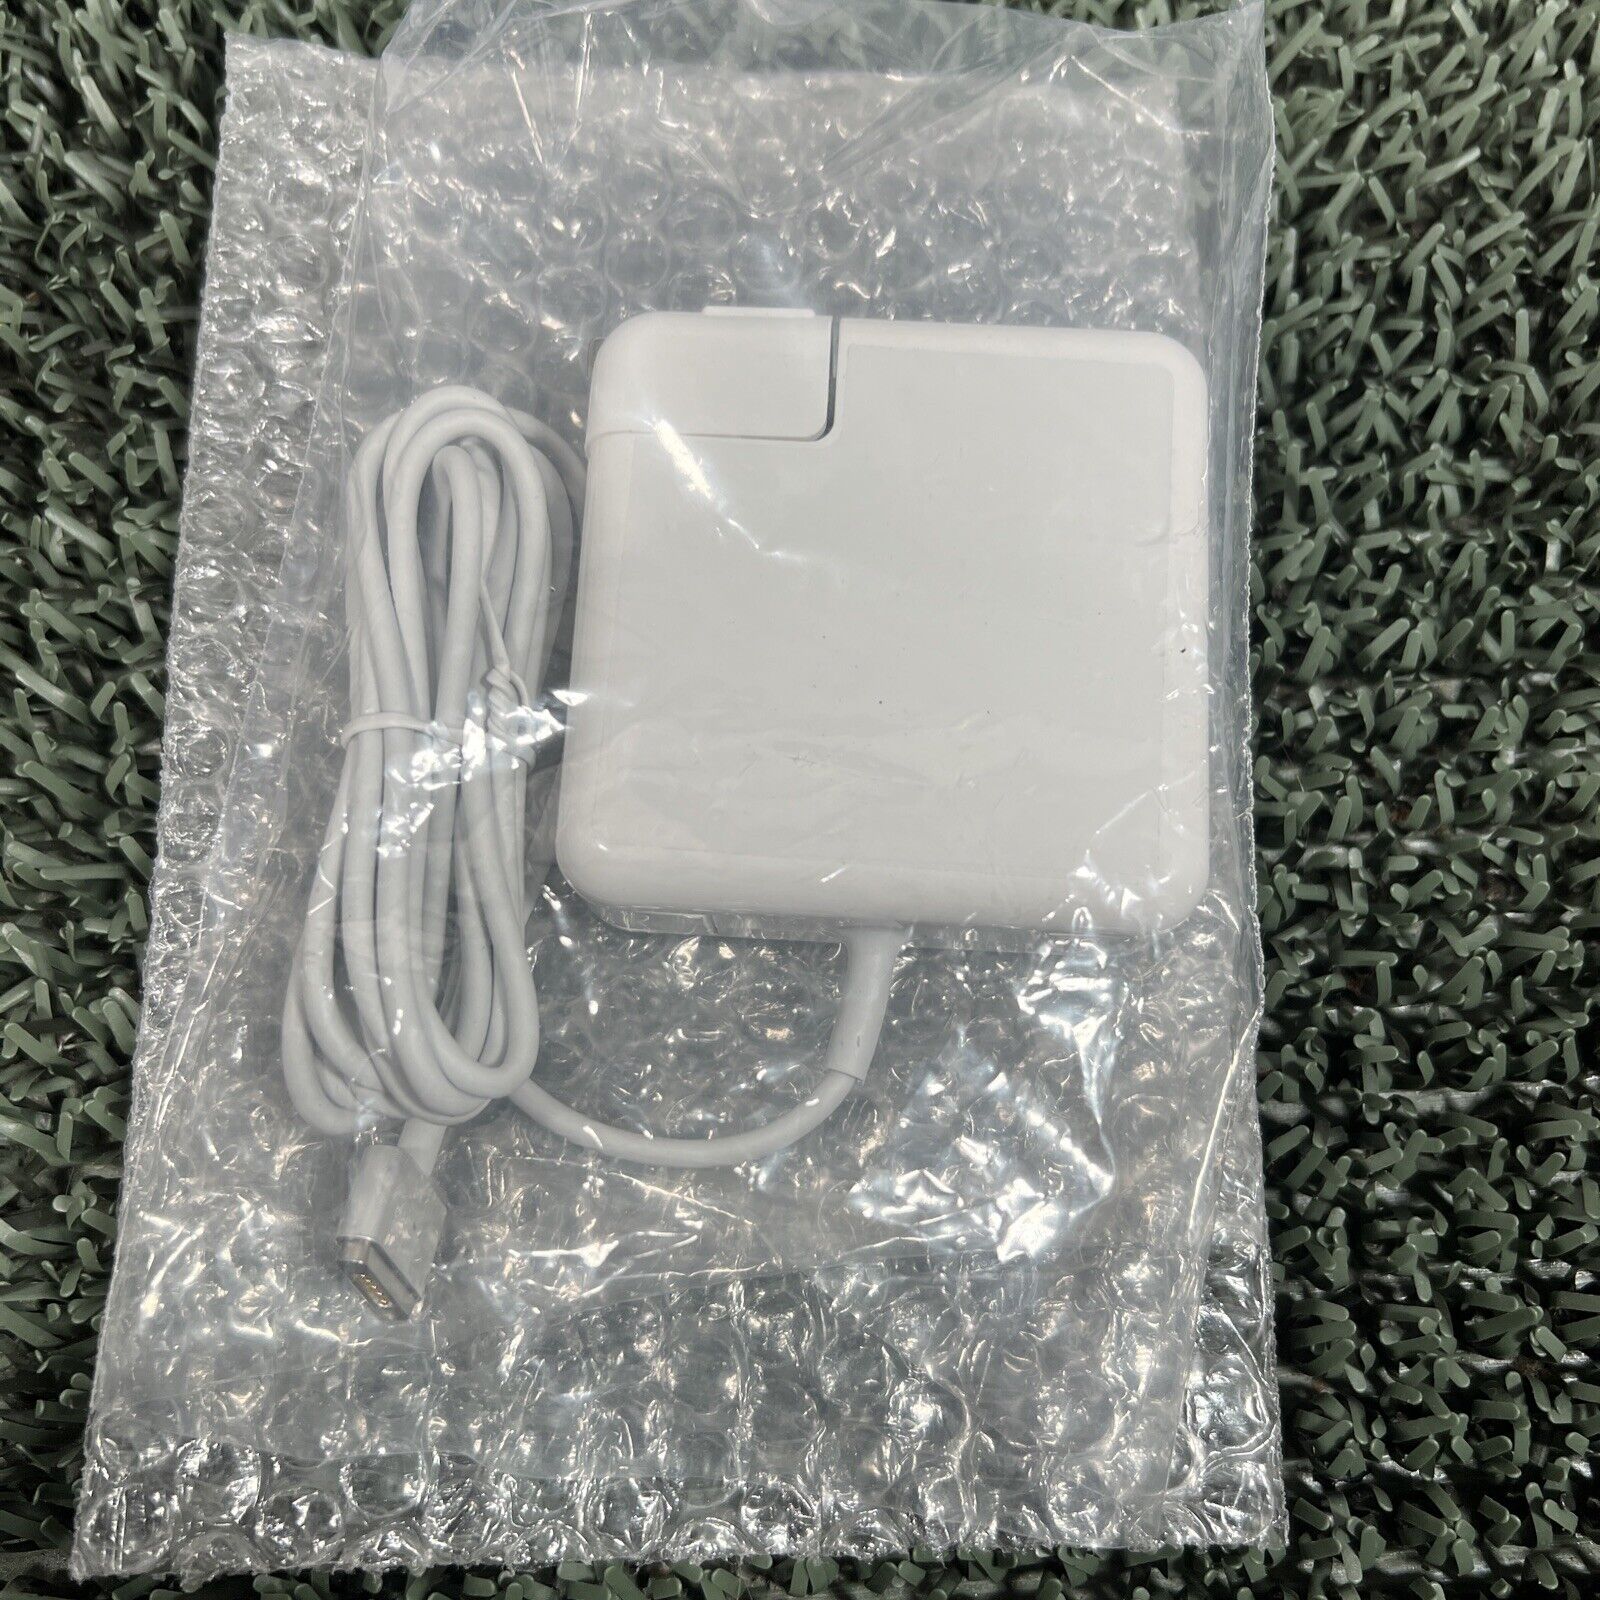 Replacement Apple Ac power adapter charger 60w model pa-60w 16.5v 3.65a (#105)